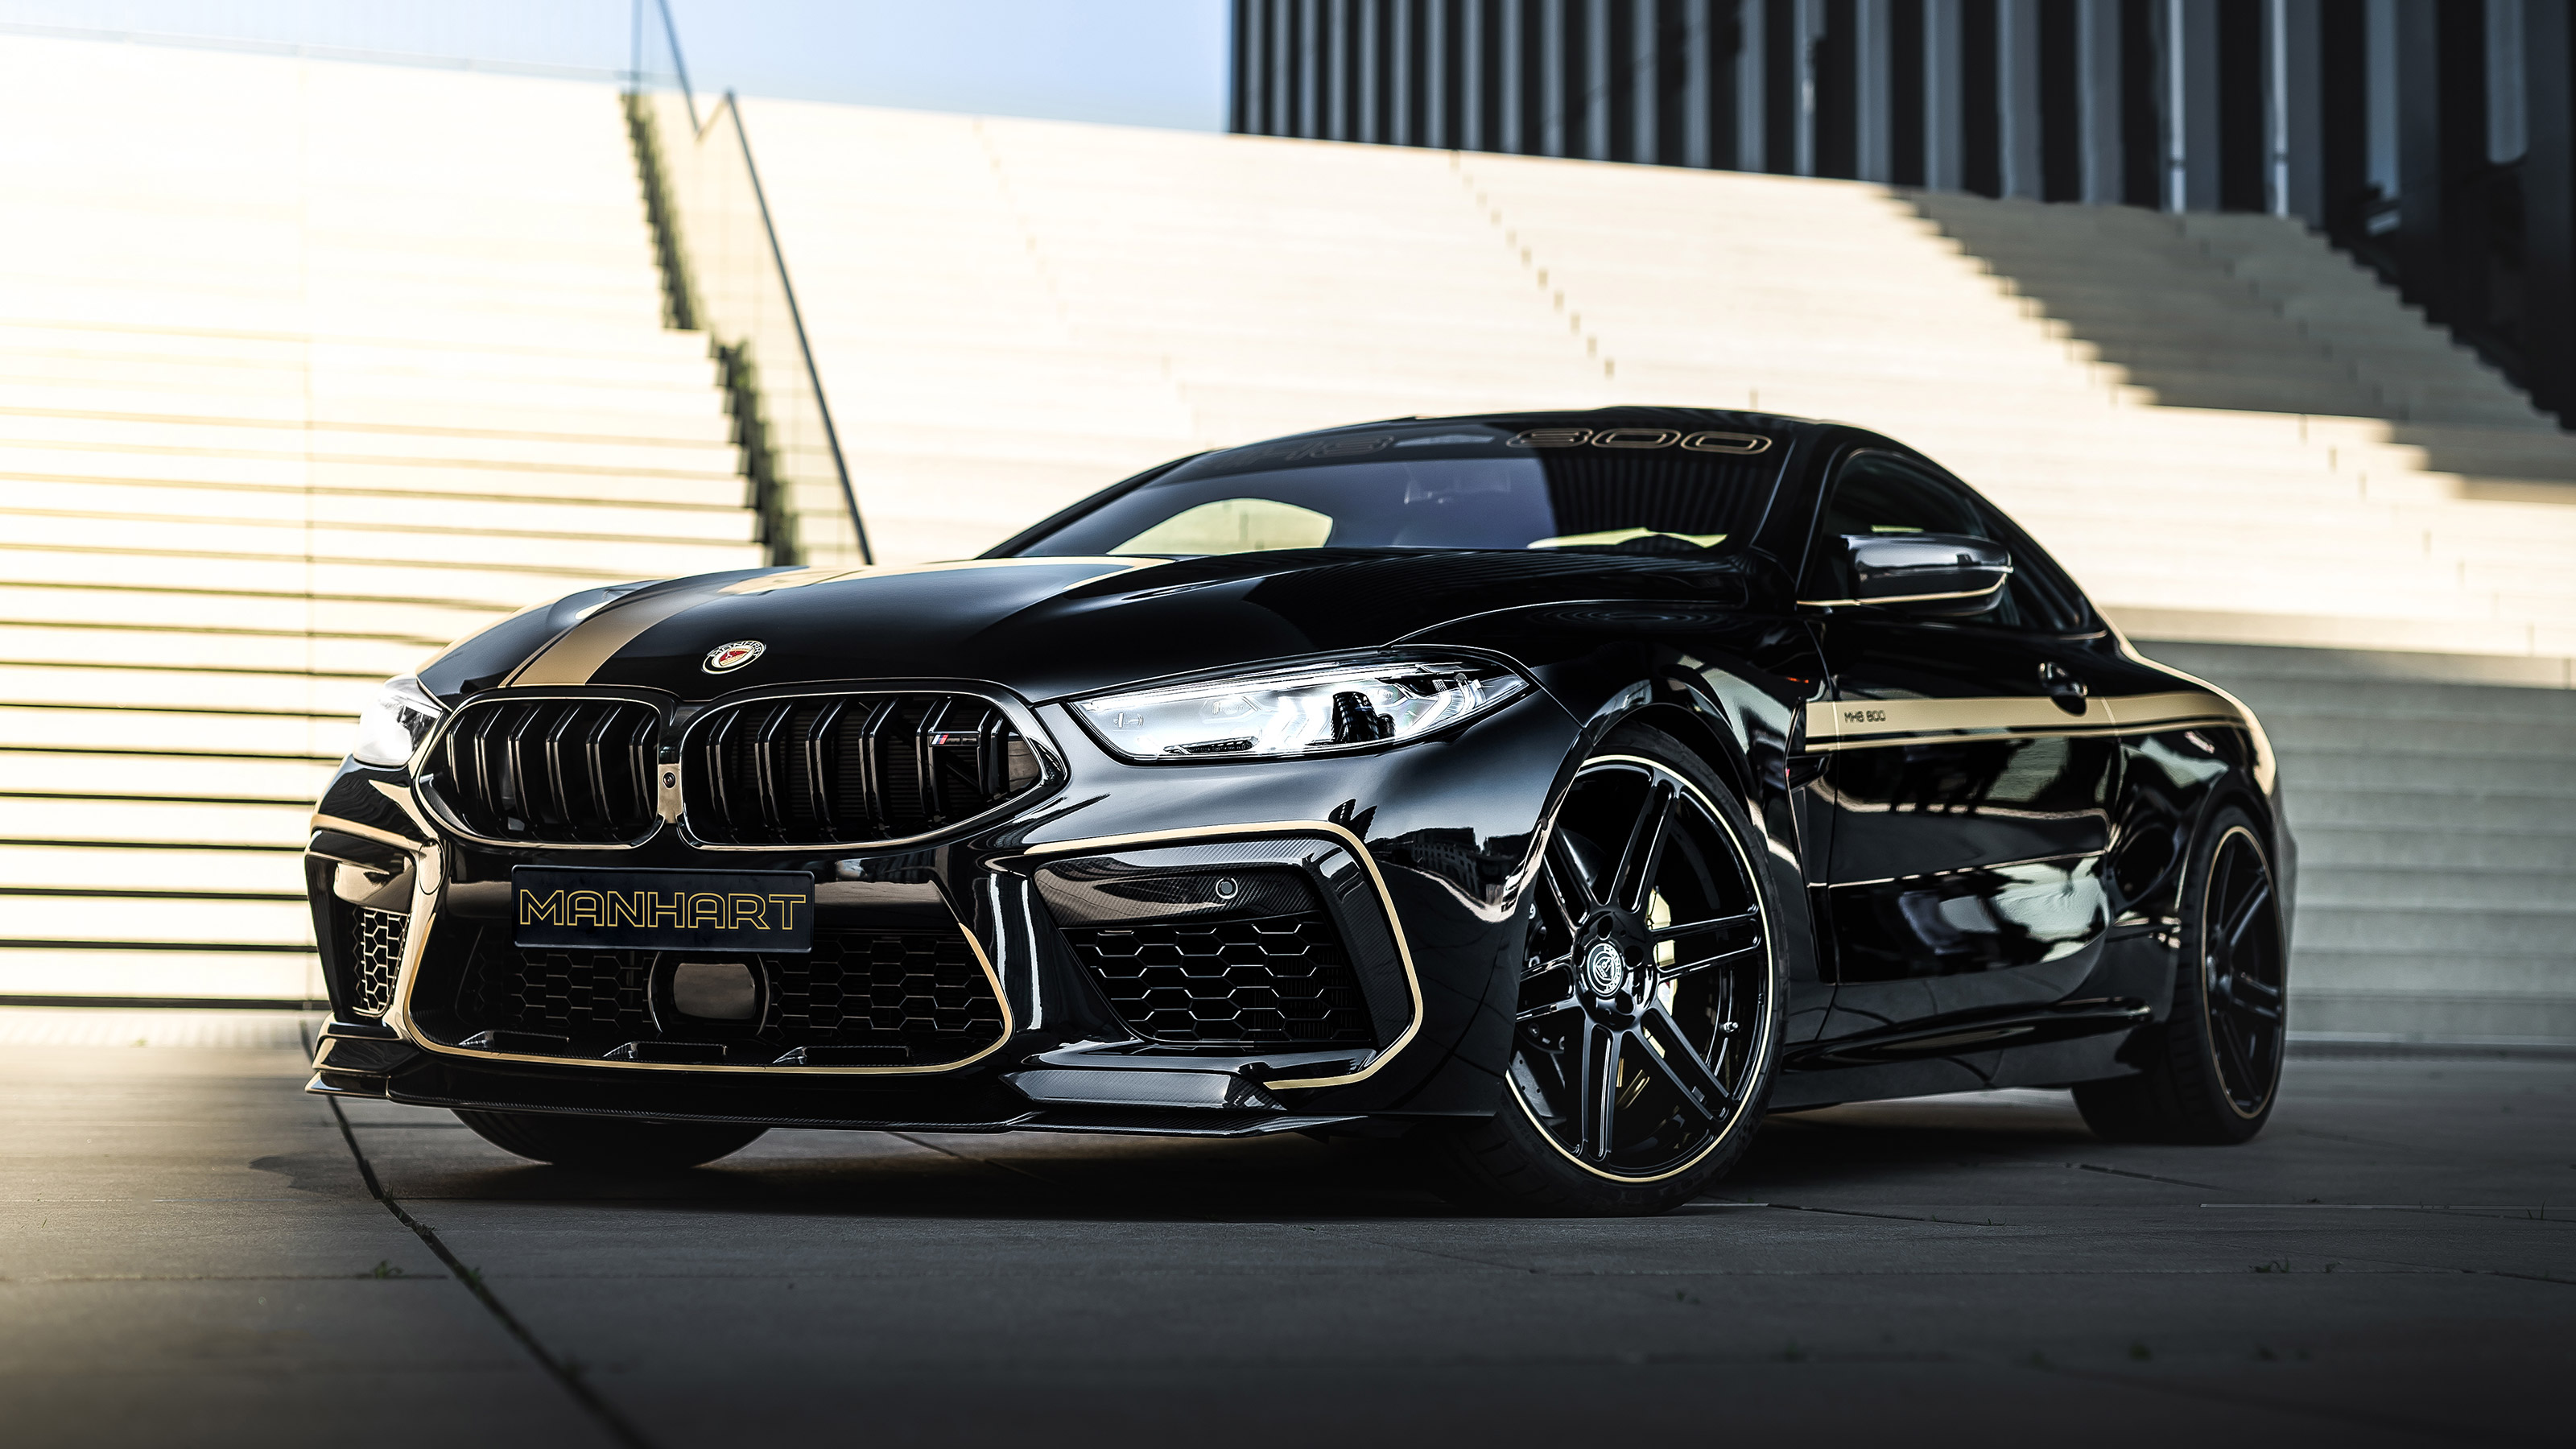 This Bmw M8 Competition Is Faster Than A Mclaren P1 Evo